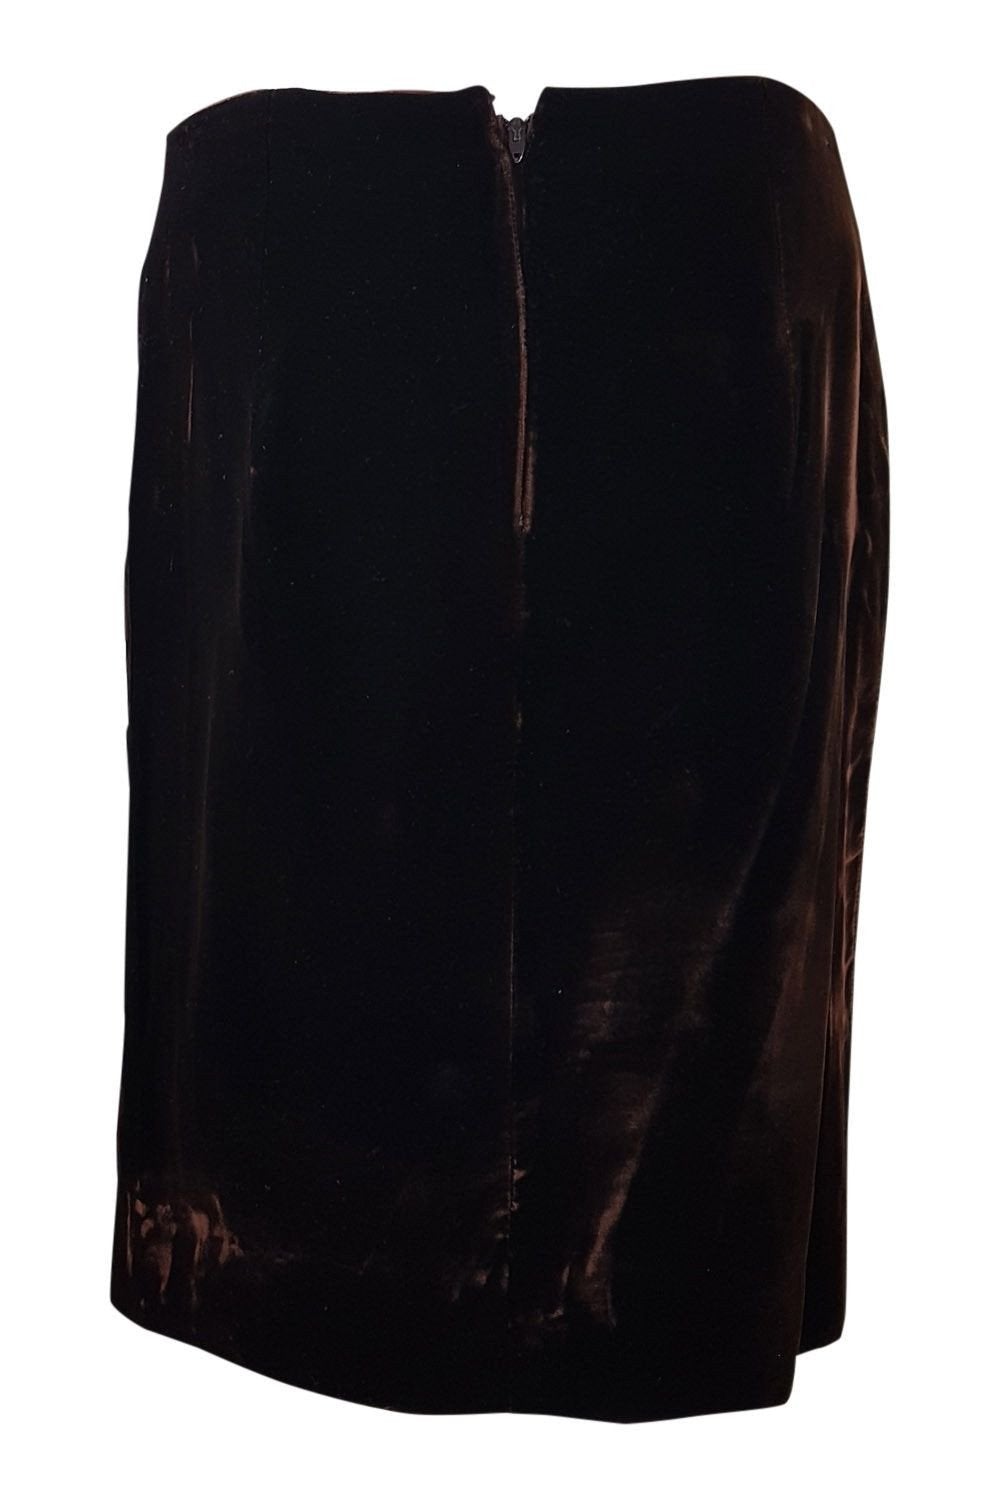 FRANK TIGNINO Brown Suede Skirt (UK 10)-Frank Tignino-The Freperie